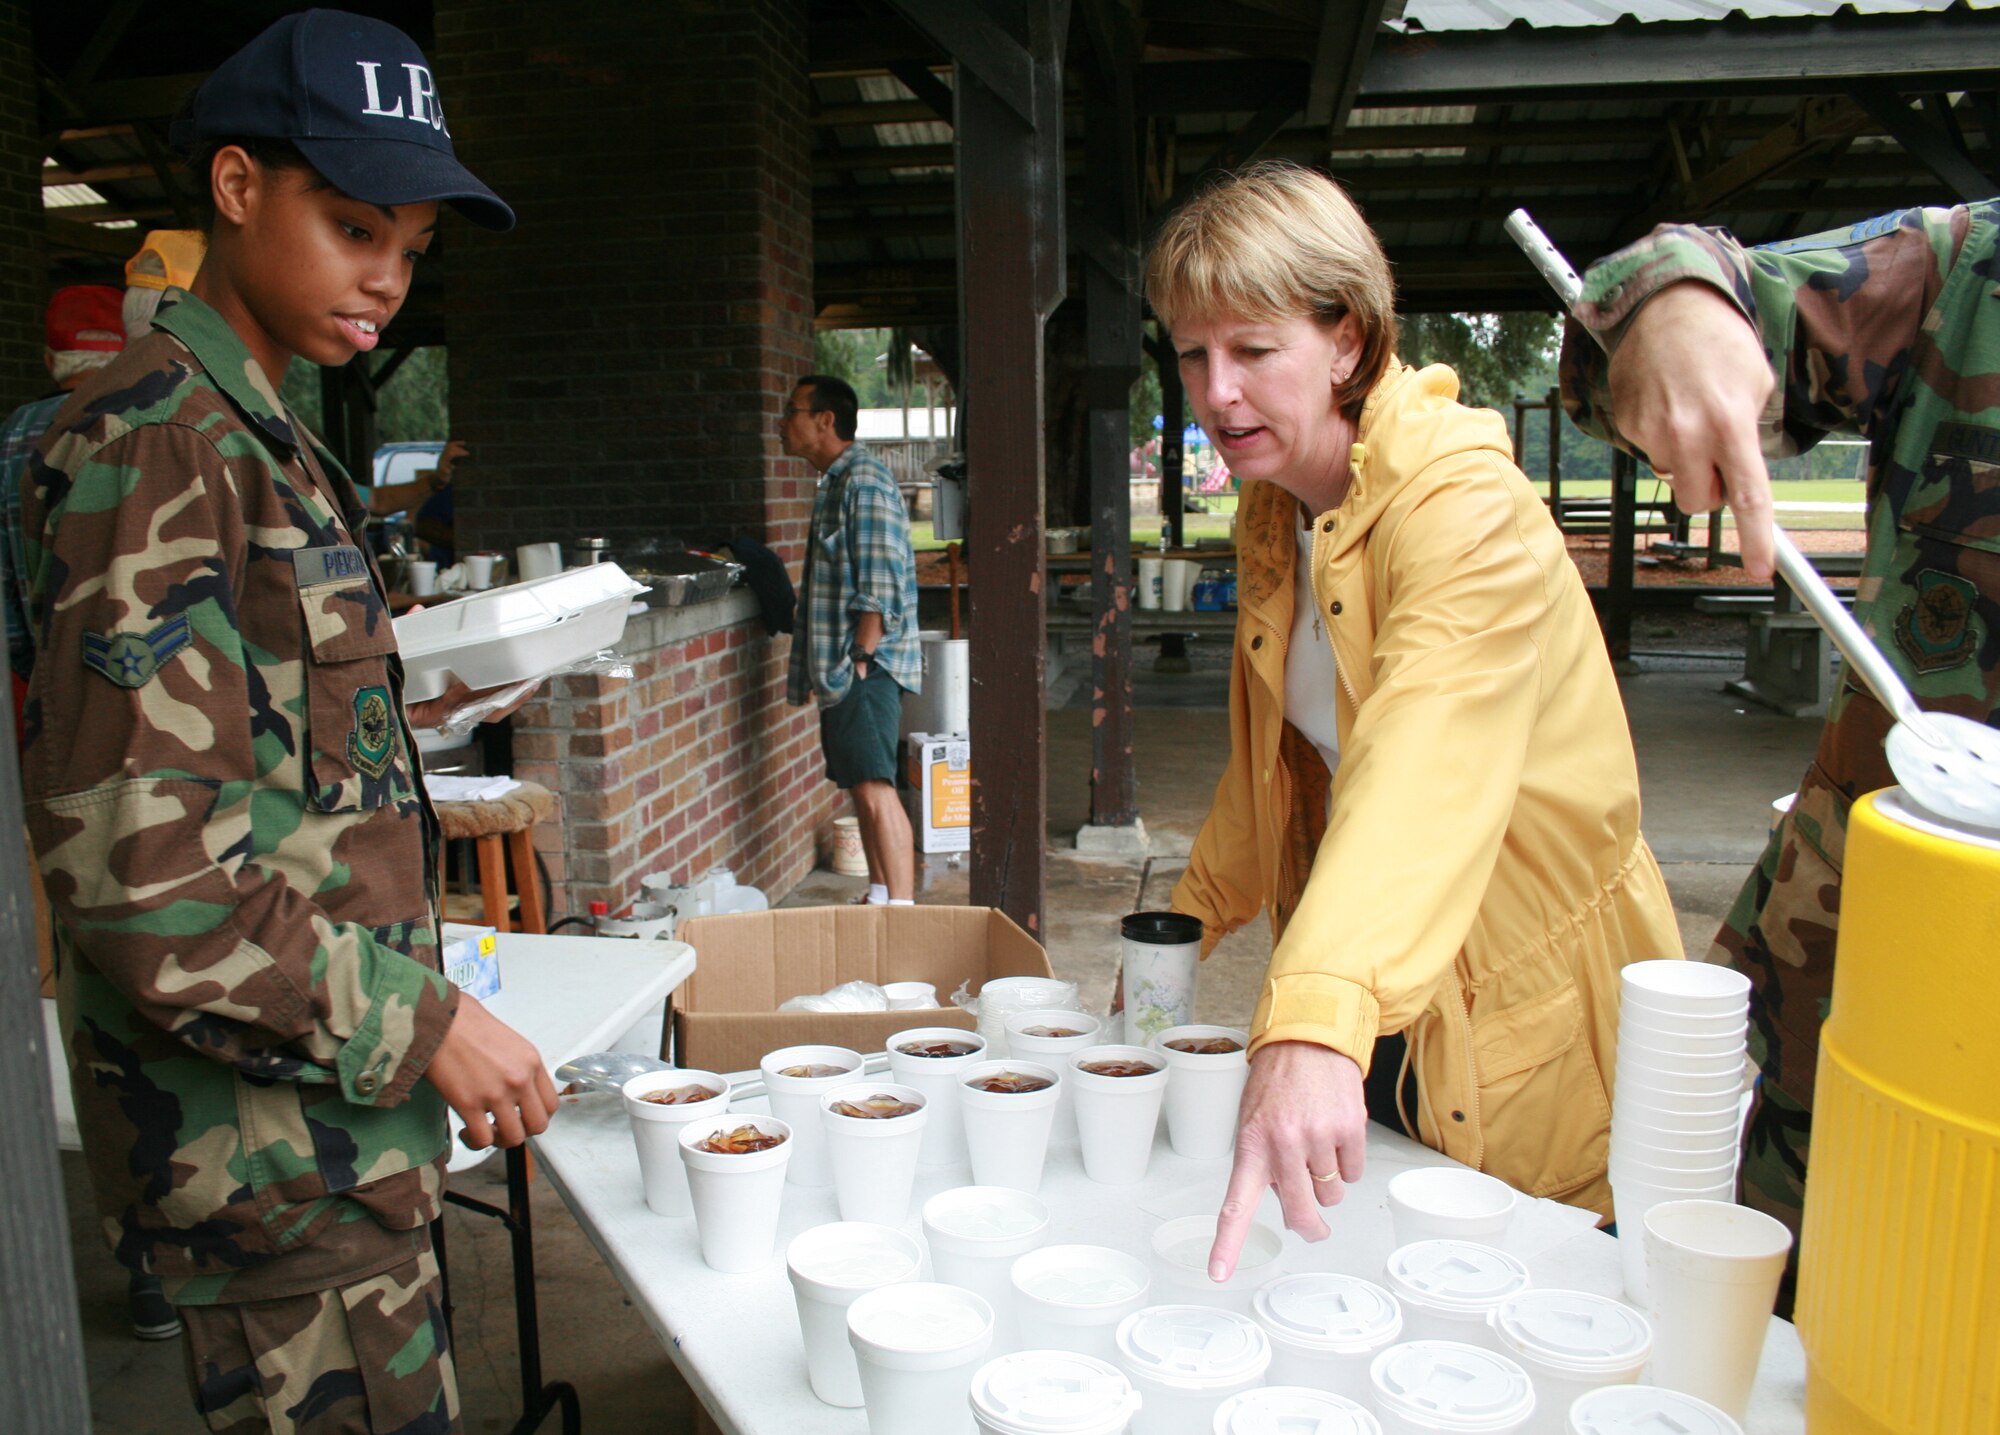 Chief Master Sgt. Maureen Adkins, 315th Mission Support Squadron, explains the drink selection to Airman 1st Class Karla Pierson, 437th Logistic Readiness Squadron, Charleston AFB, S.C., at the Charleston Chiefs group fish fry held at the base picnic grounds. (Photo by Kirsty Murray)